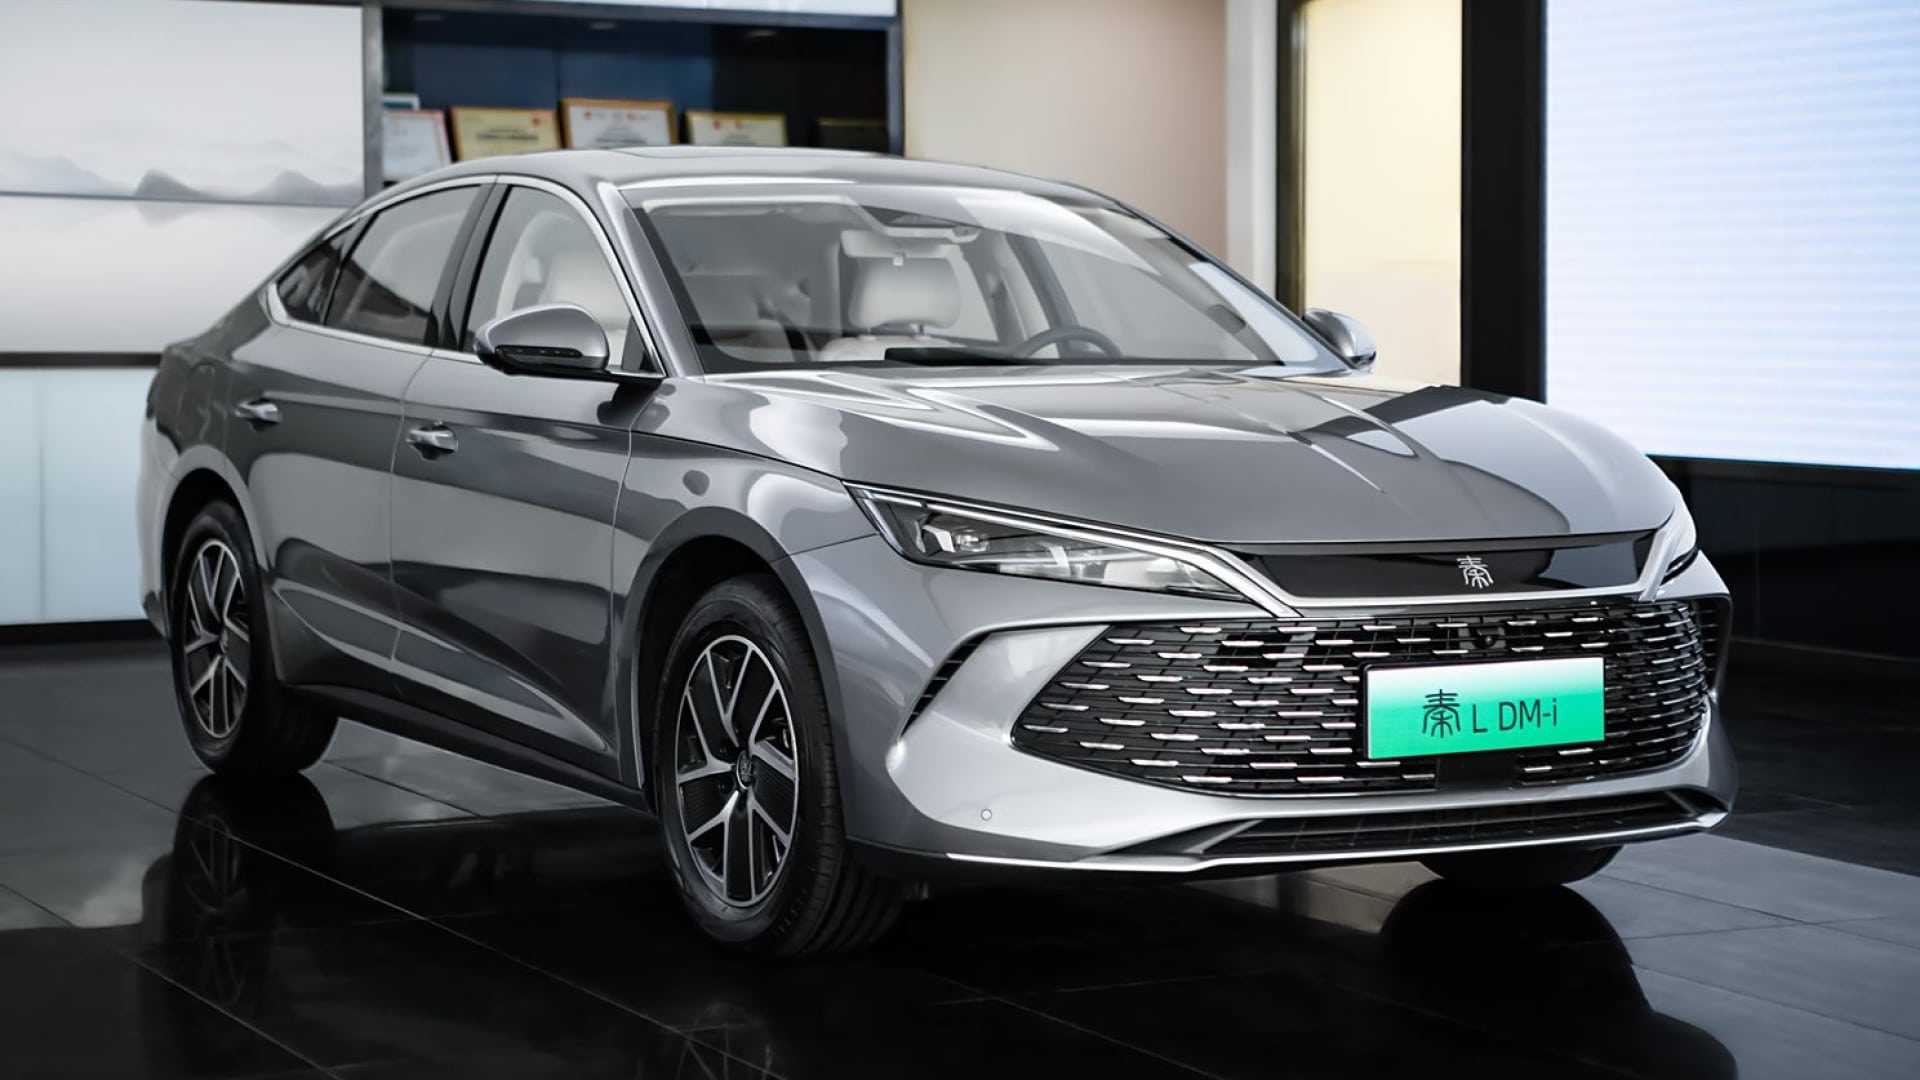 BYD Qin L plug-in hybrid sedan arrived at dealers in China before the launch